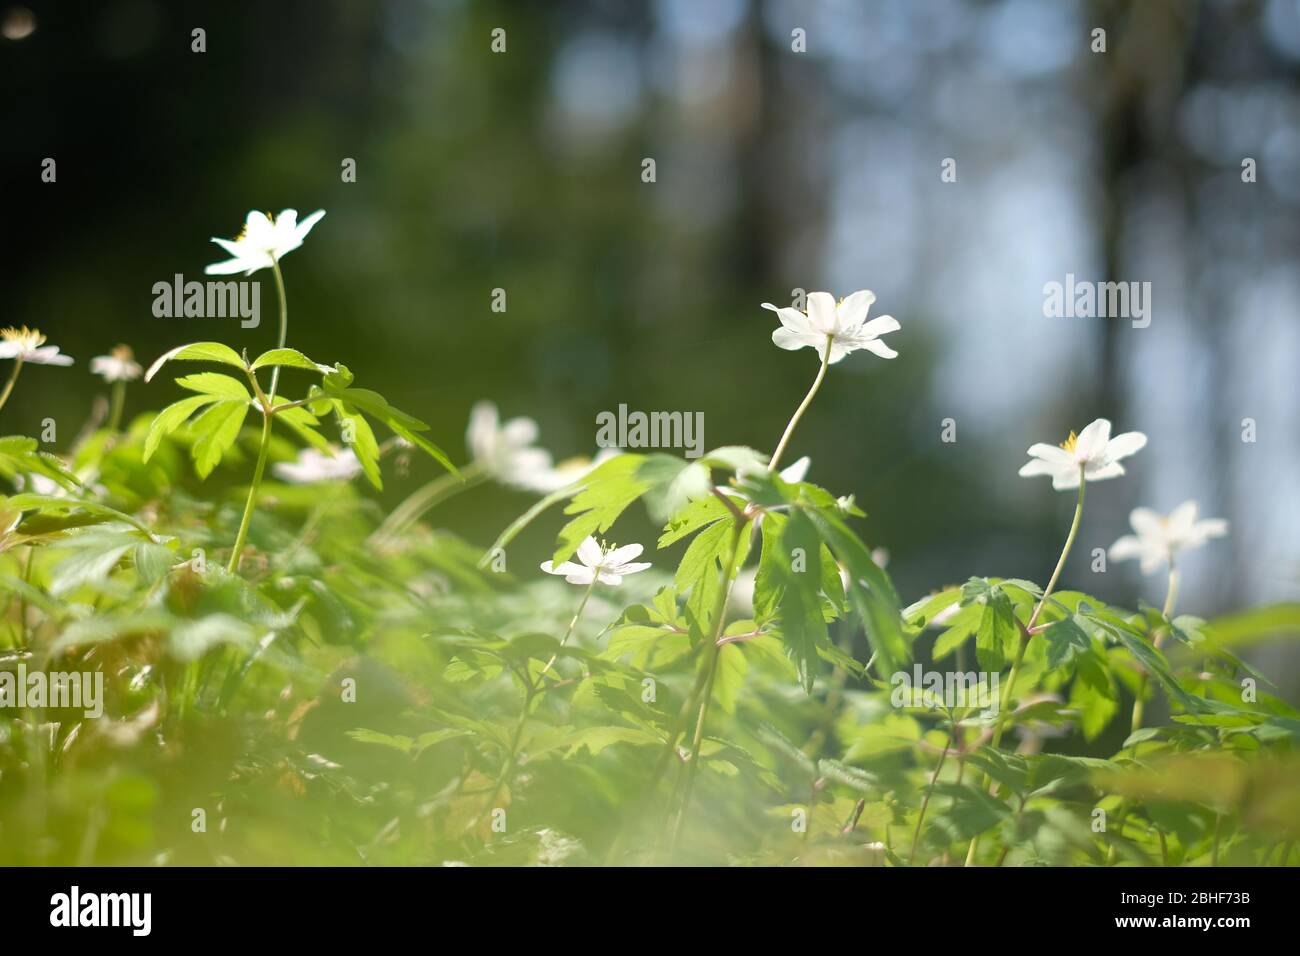 White Anemona flowers on spring forest closeup. Macro nature photography Stock Photo